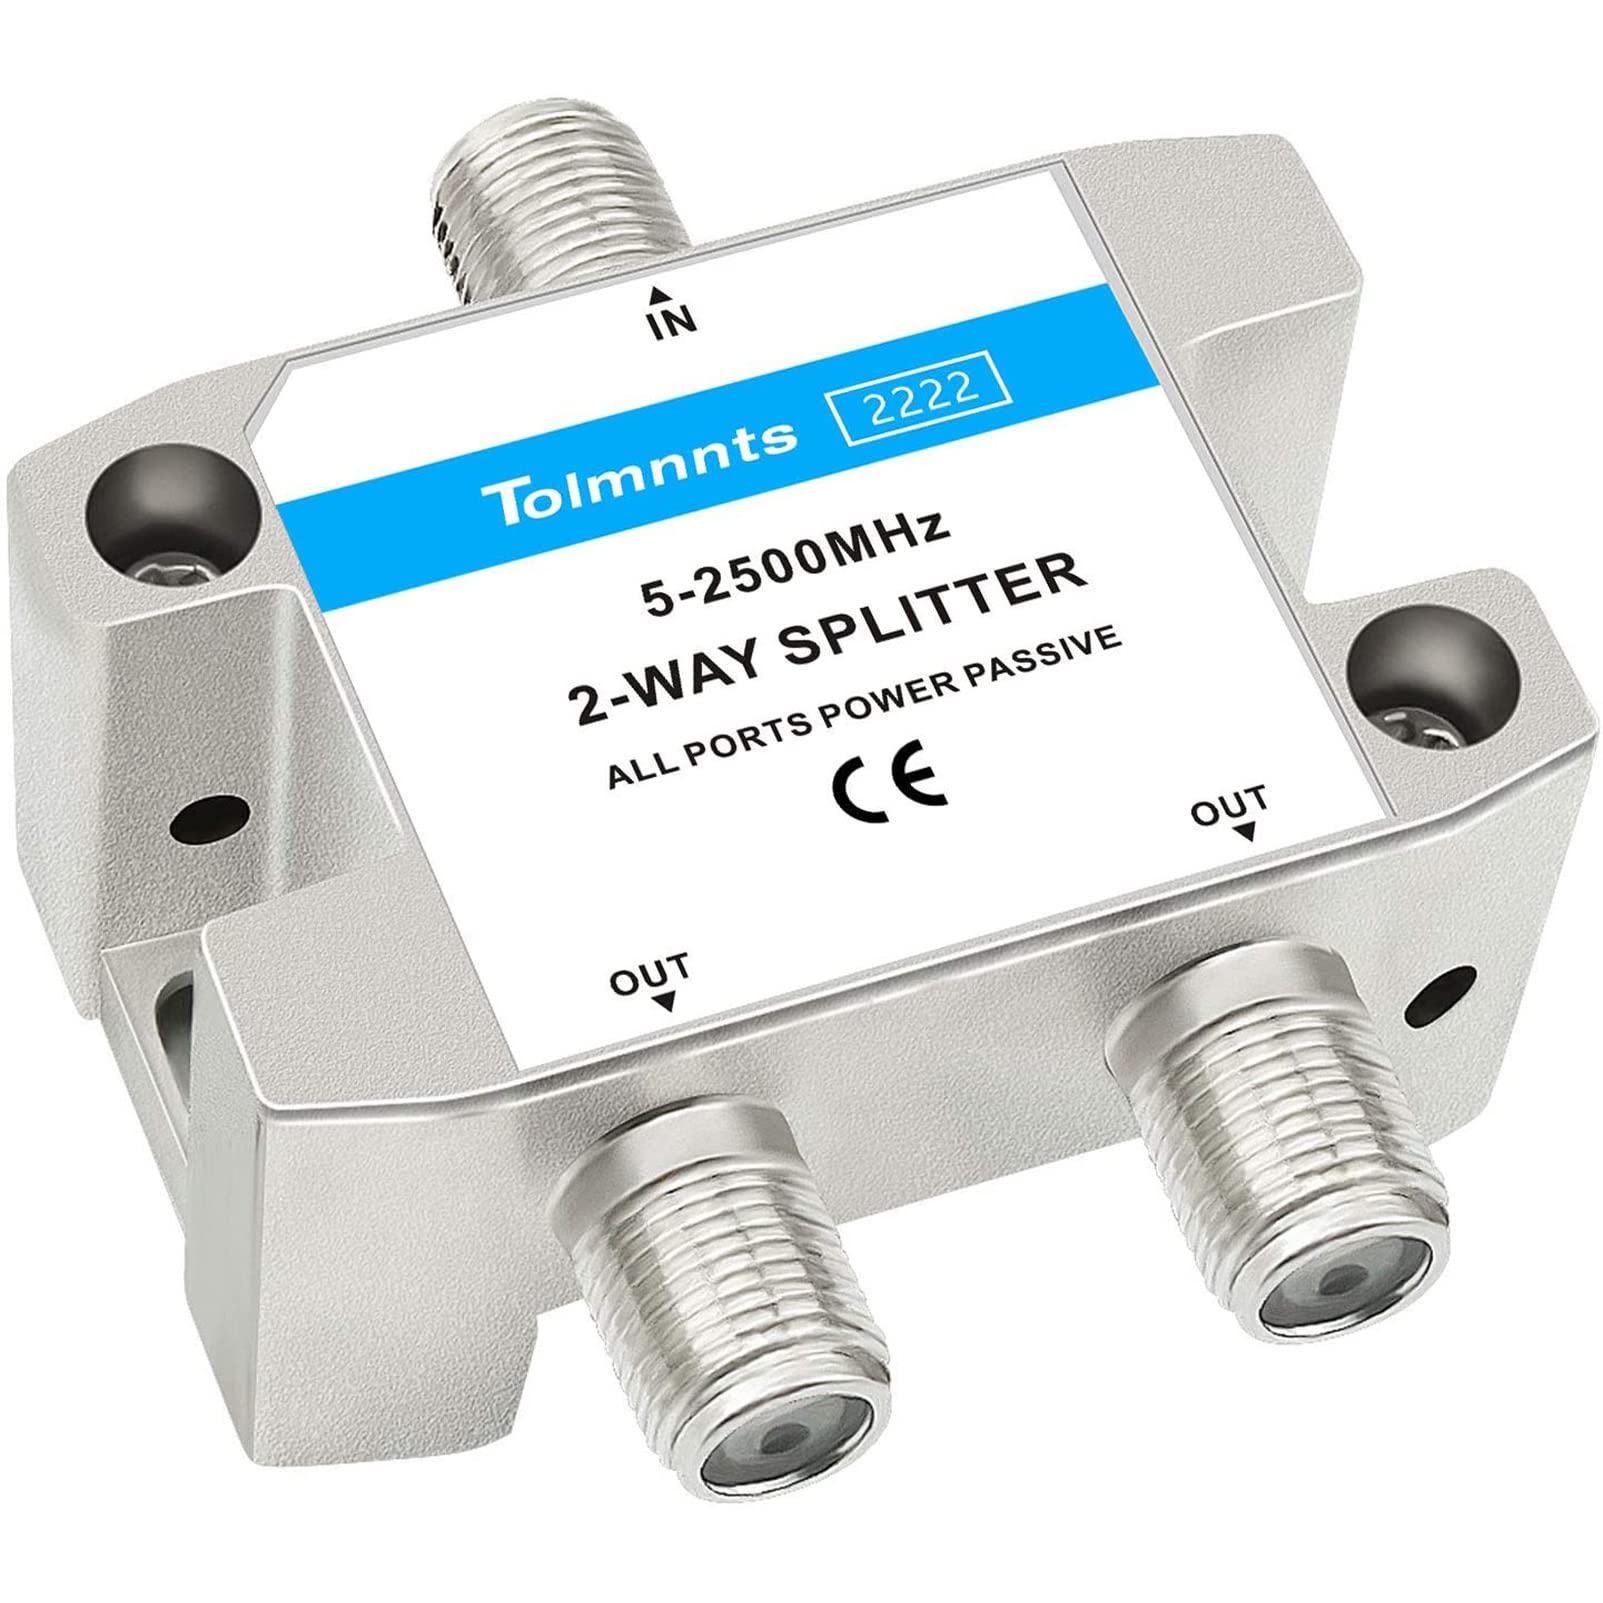 Book Cover Tolmnnts 2 Way Coaxial Cable Splitter 2.5GHZ 5-2500MHz, RG6 Compatible, Nickel Plated, Cable Splitter Work with CATV, Satellite TV,Antenna System and MoCA Configurations (2 Way)